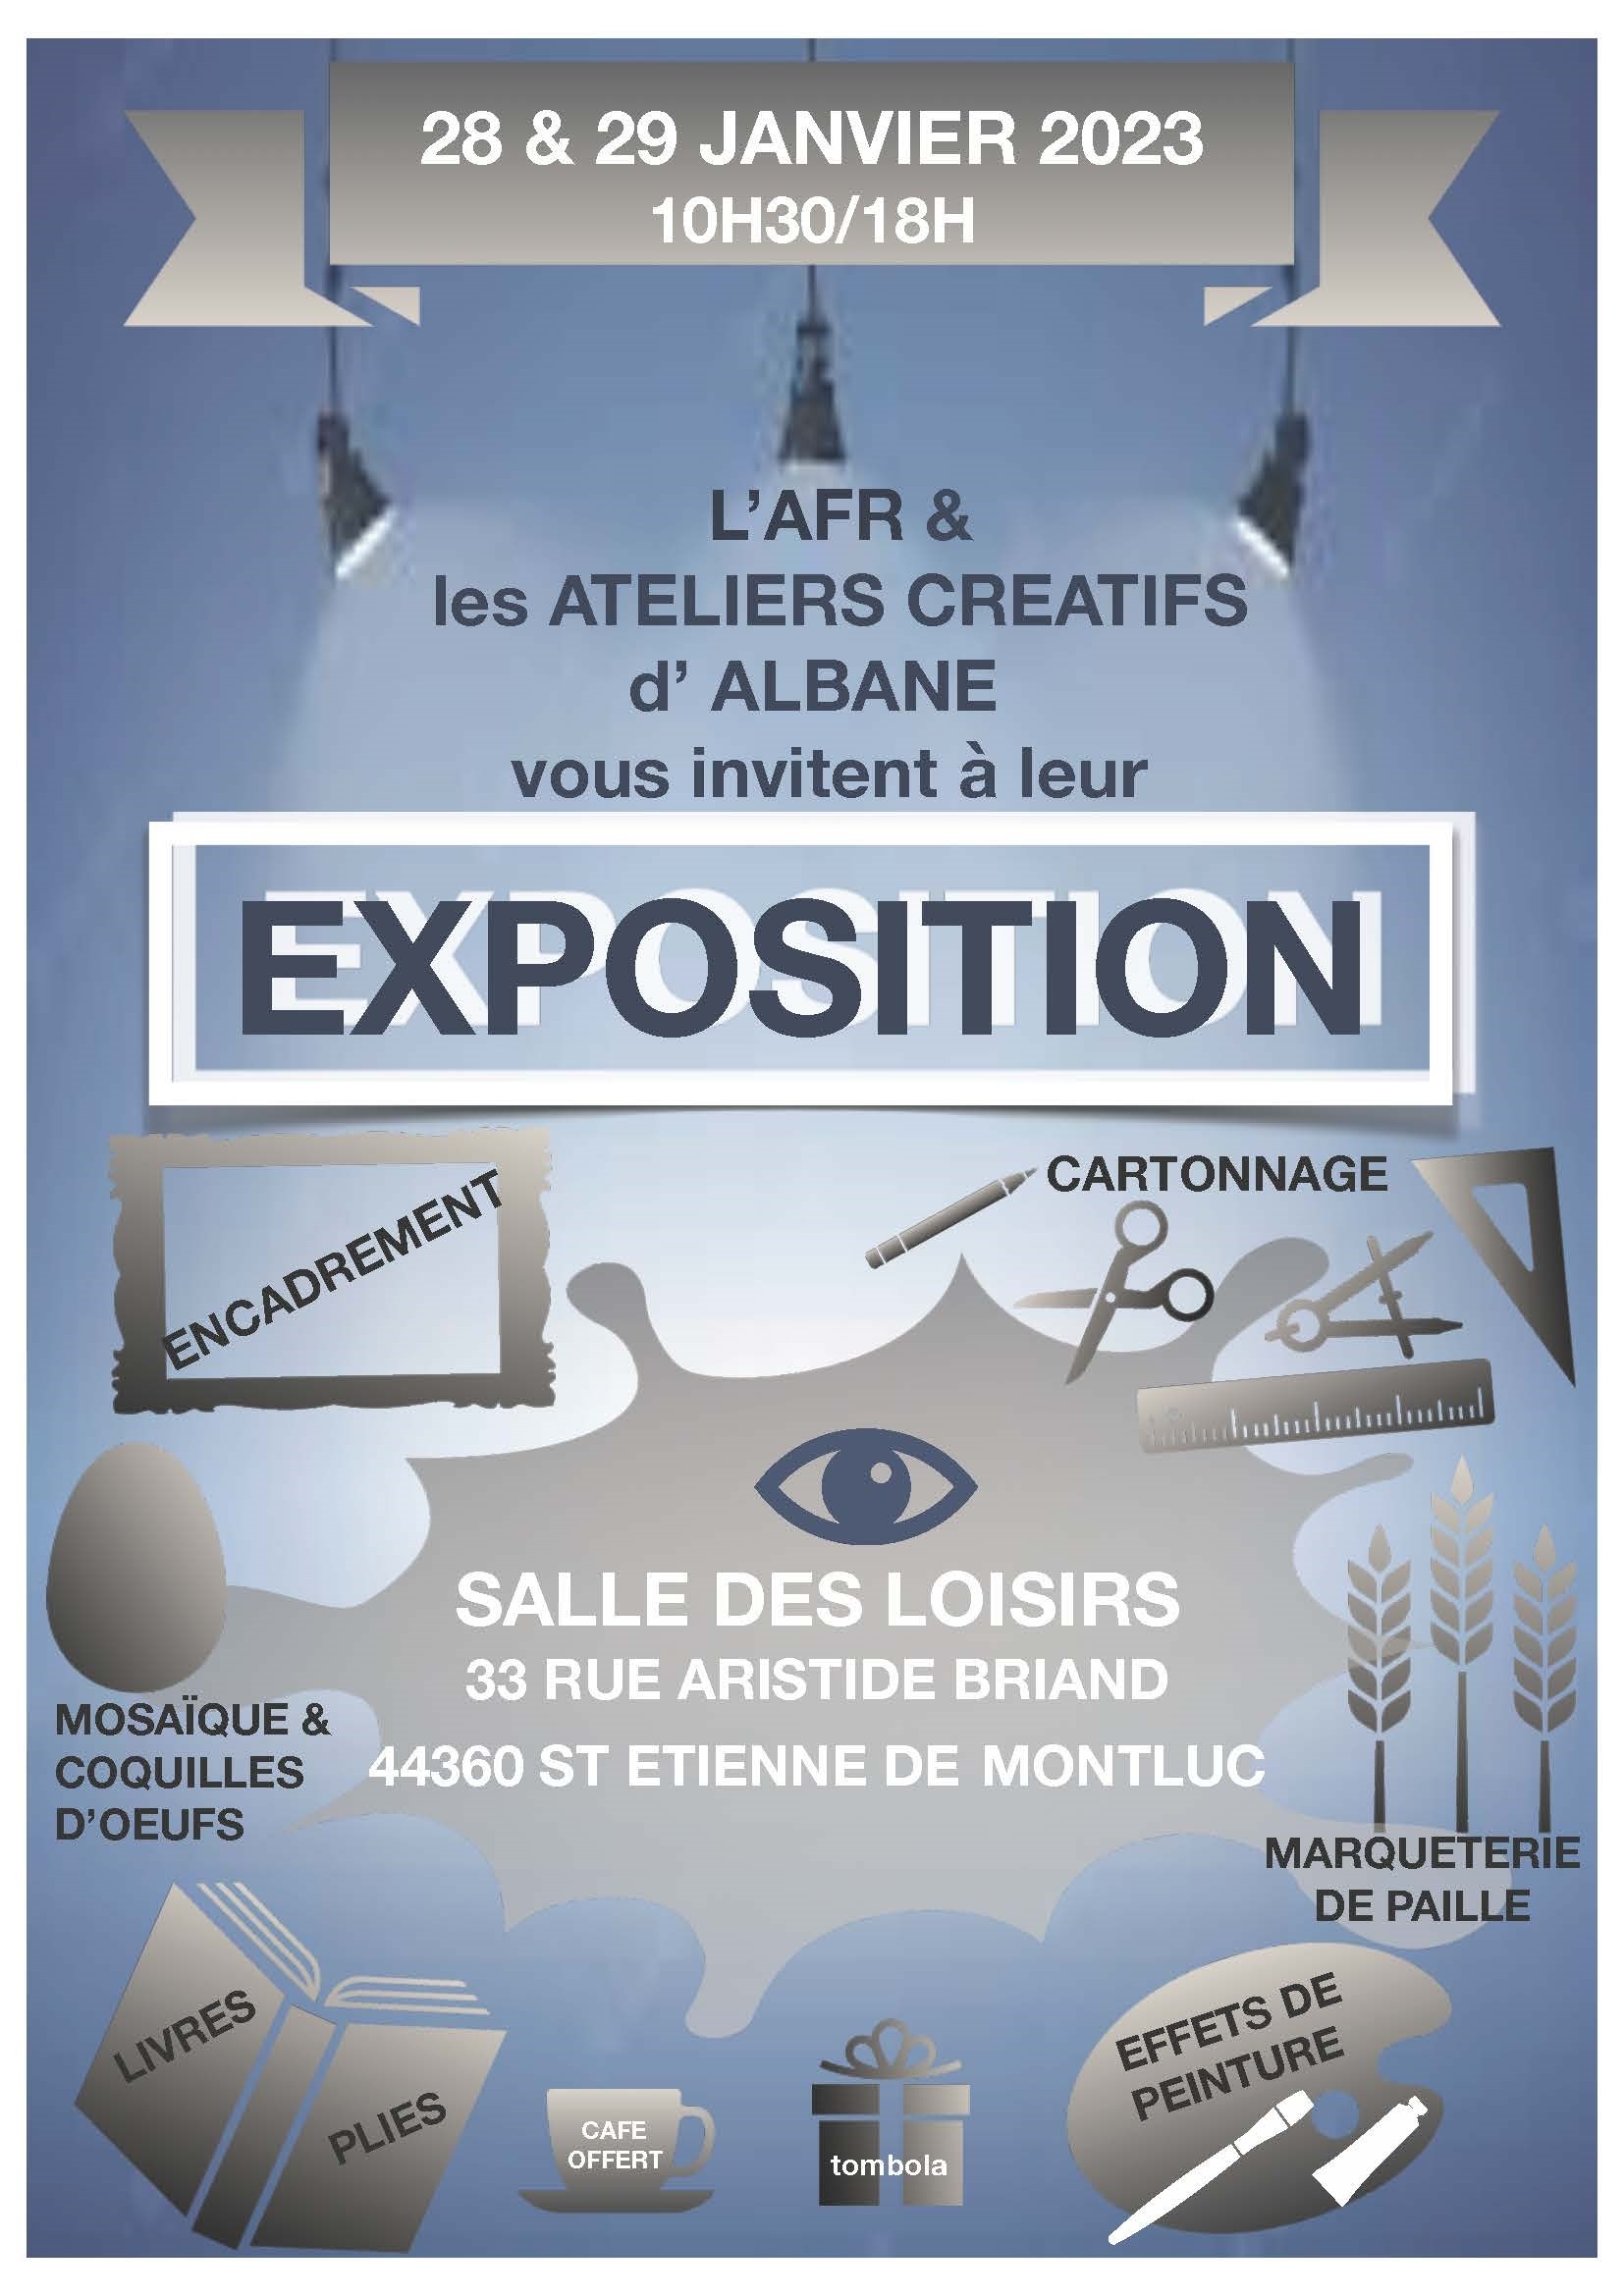 Affiche expo © AFR Albane